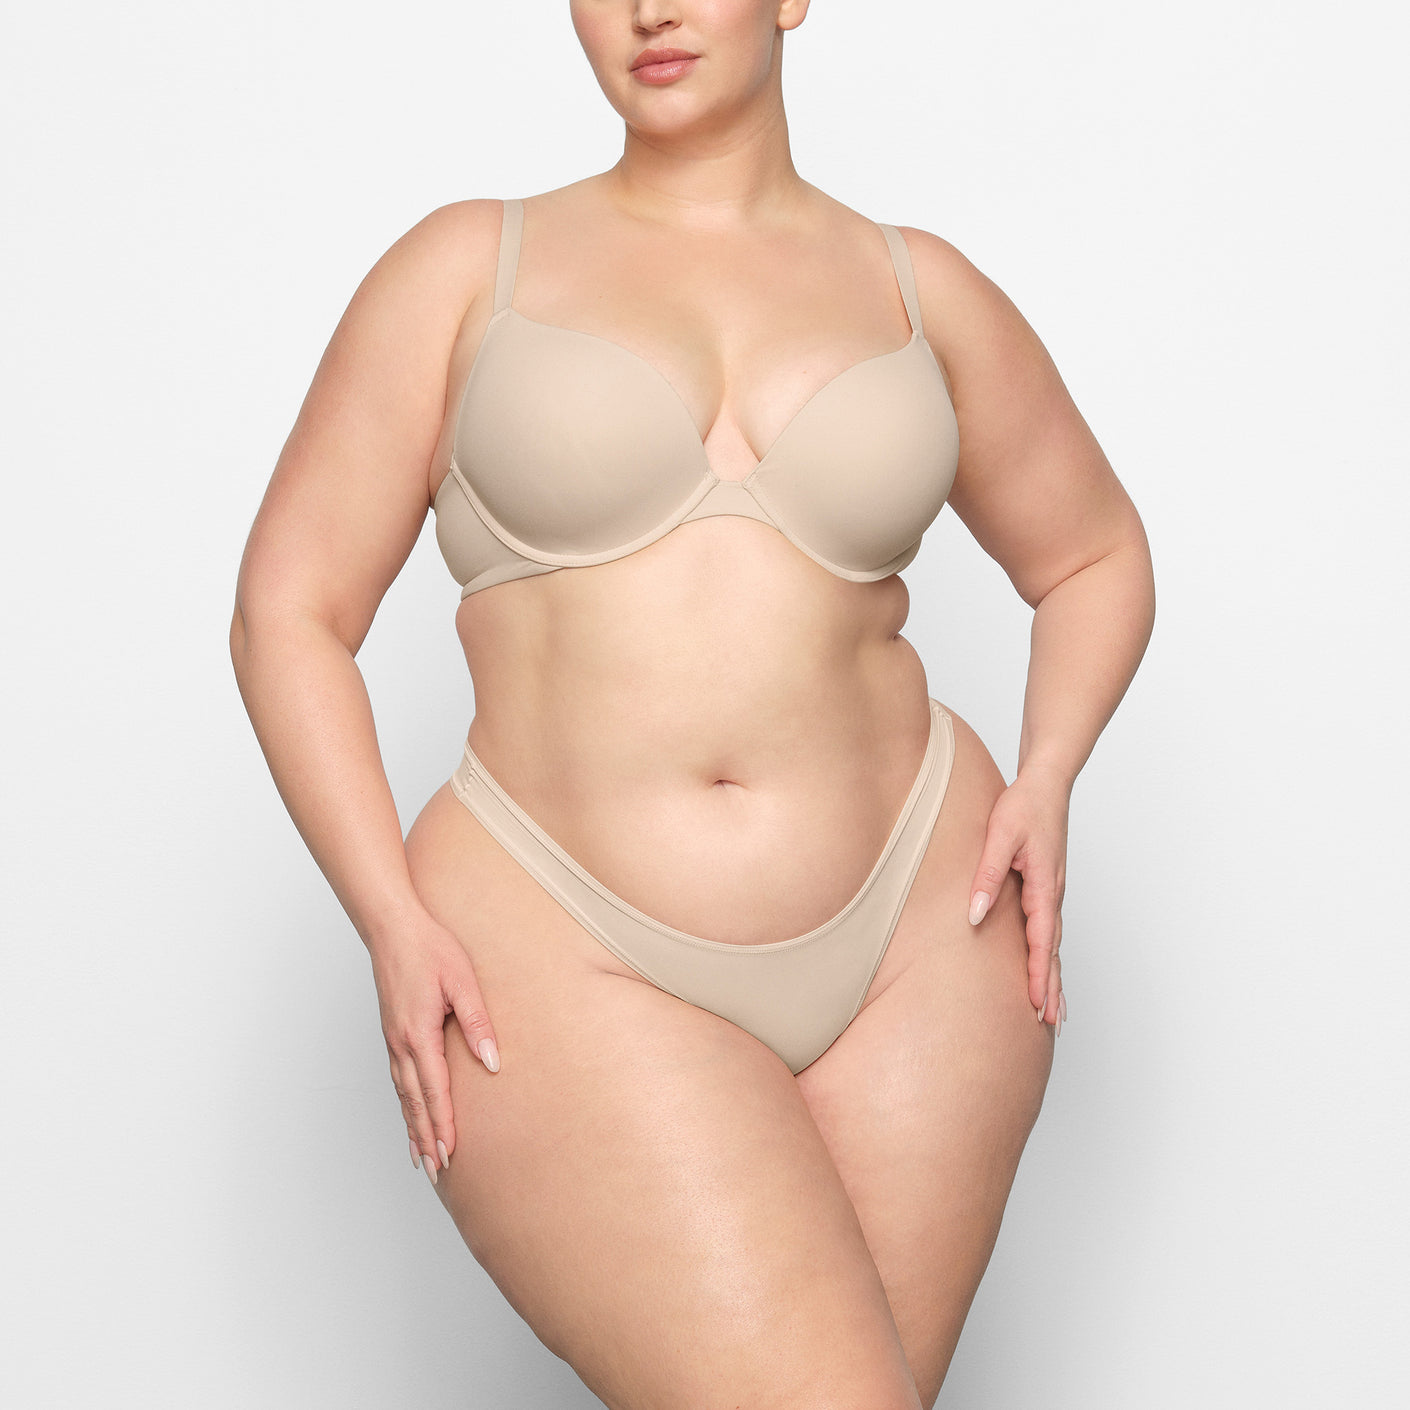 SKIMS Fits Everybody T-shirt Push-up Bra in Sienna 32A Size 32 A - $65 New  With Tags - From Matilda